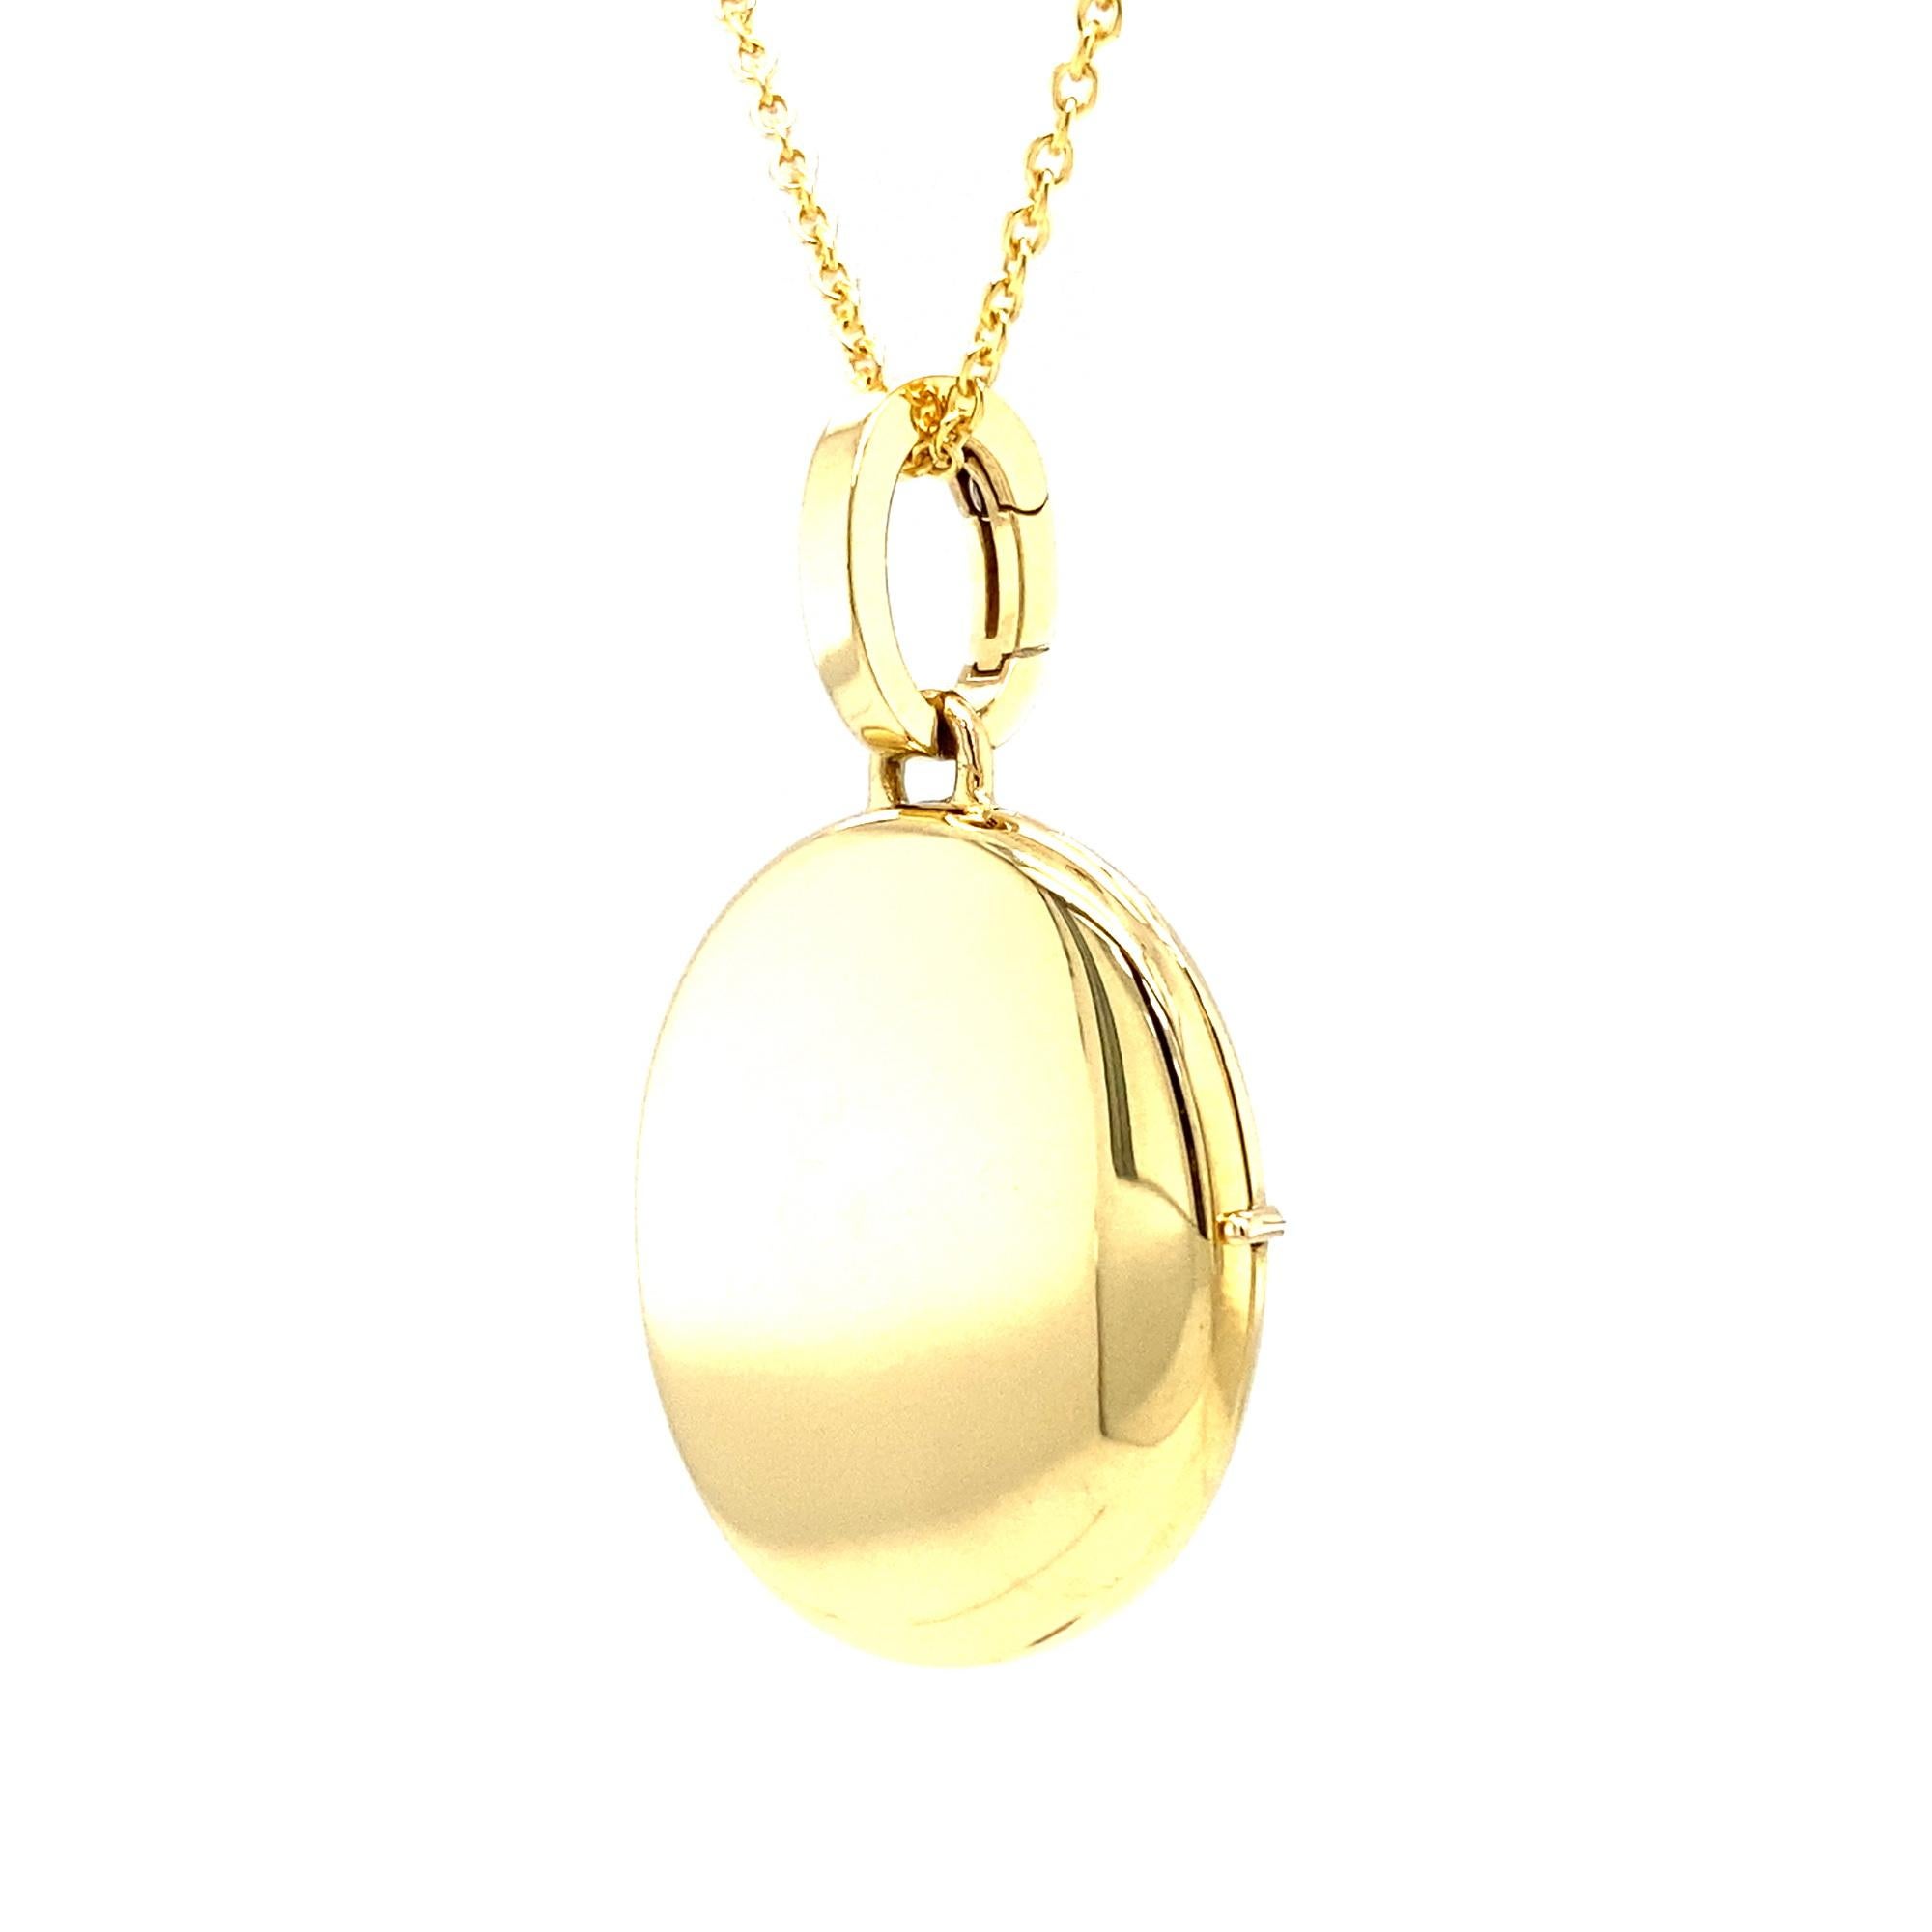 Victor Mayer customizable oval polished pendant locket necklace 18k yellow gold, Hallmark collection, measurements app. 23 mm x 20 mm

About the creator Victor Mayer
Victor Mayer is internationally renowned for elegant timeless designs and